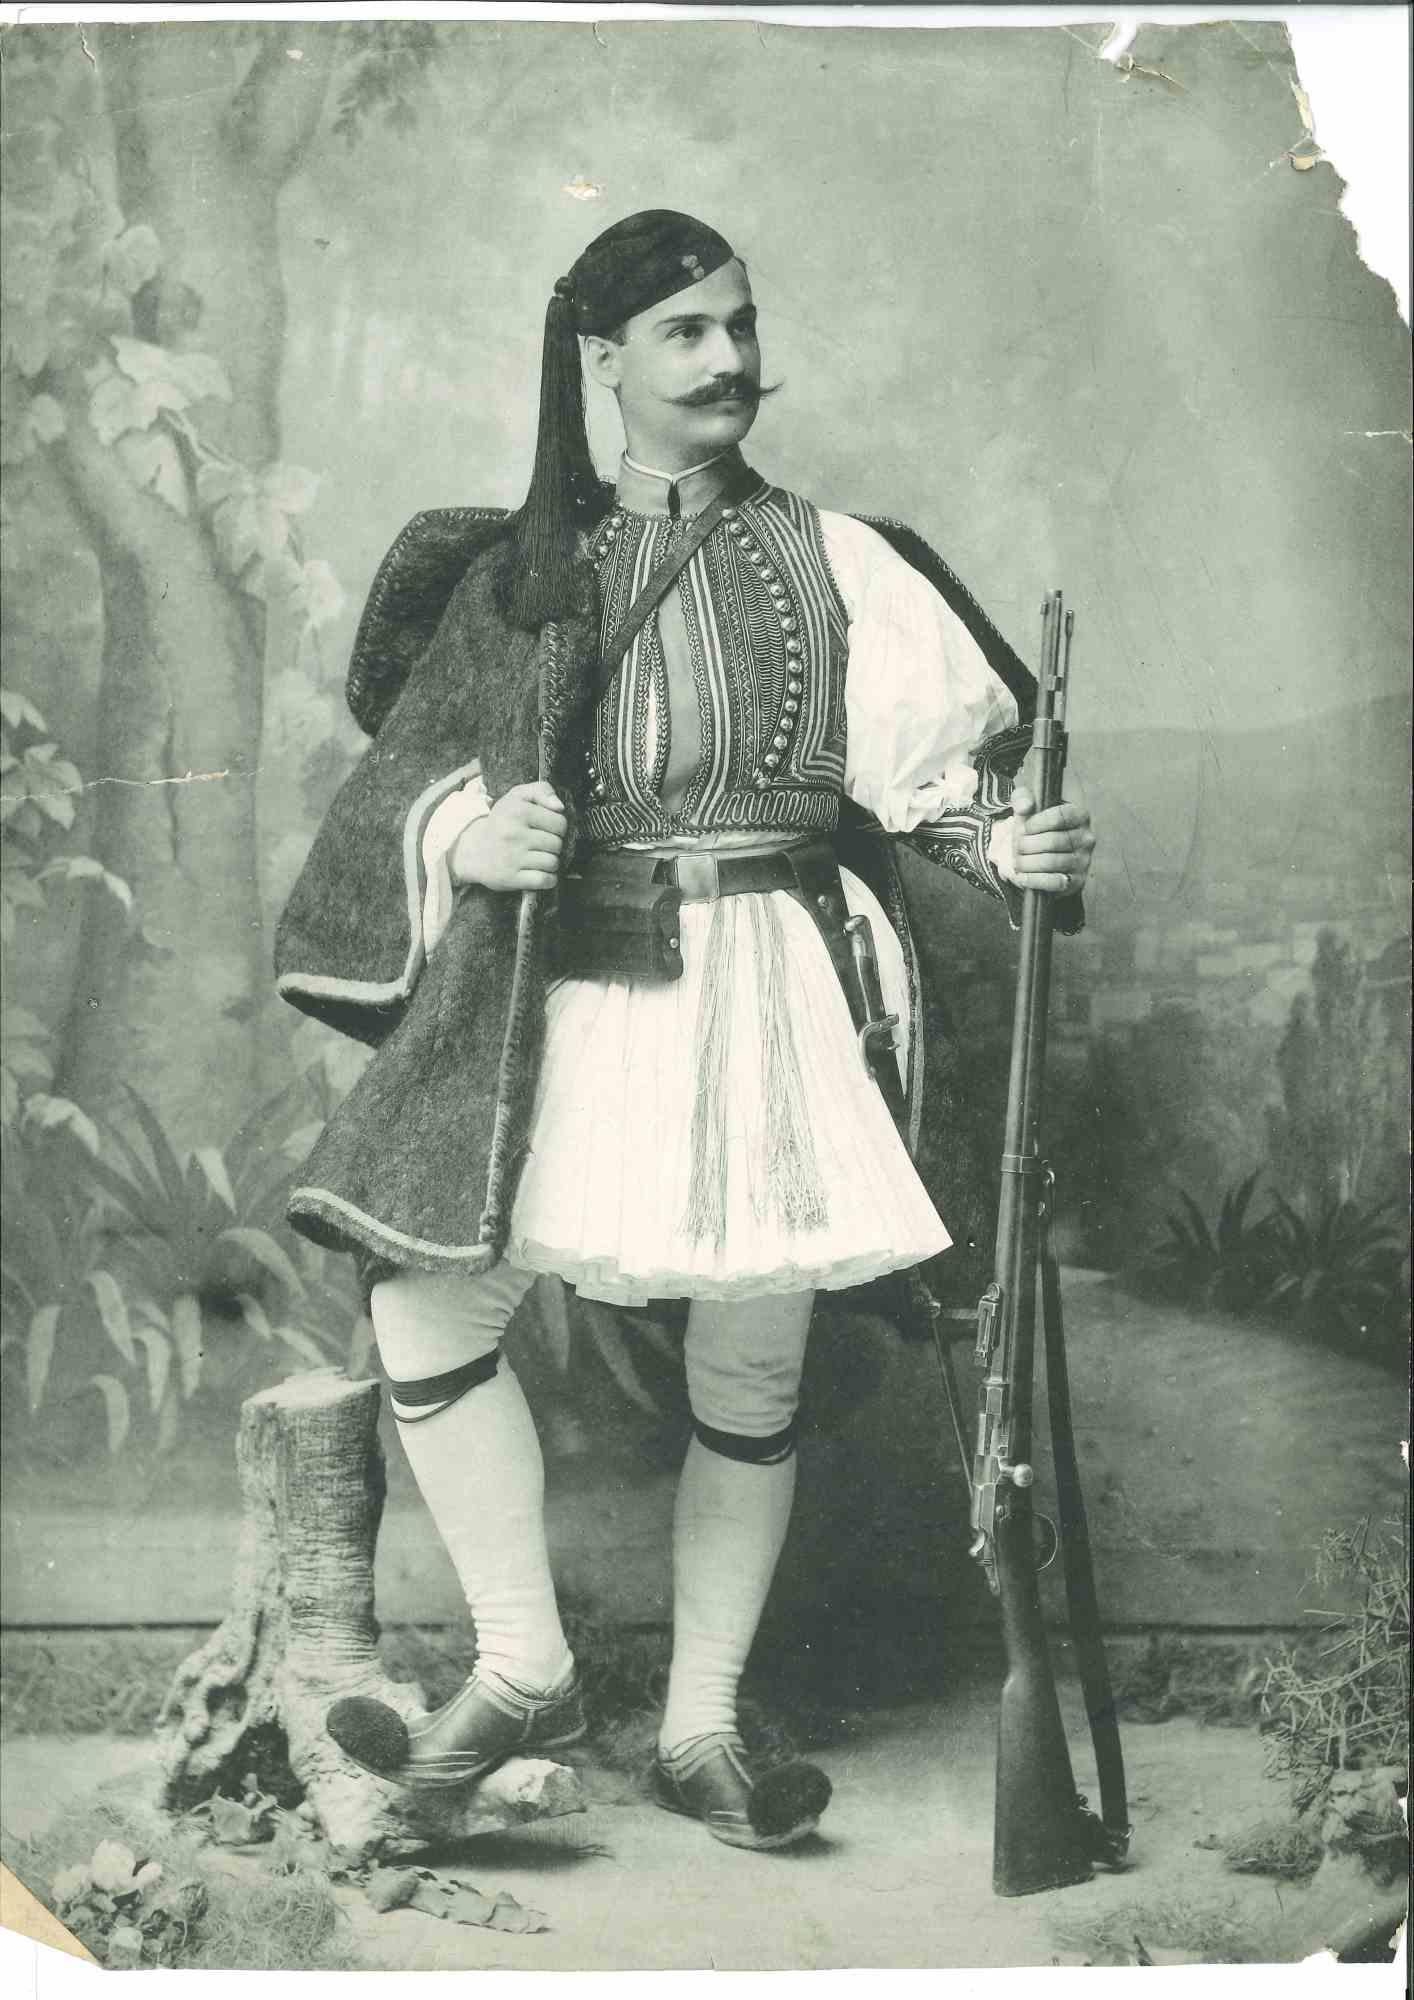 Unknown Figurative Photograph - The Old Days - A Greek Soldier in Traditional Costume - Early 20th Century